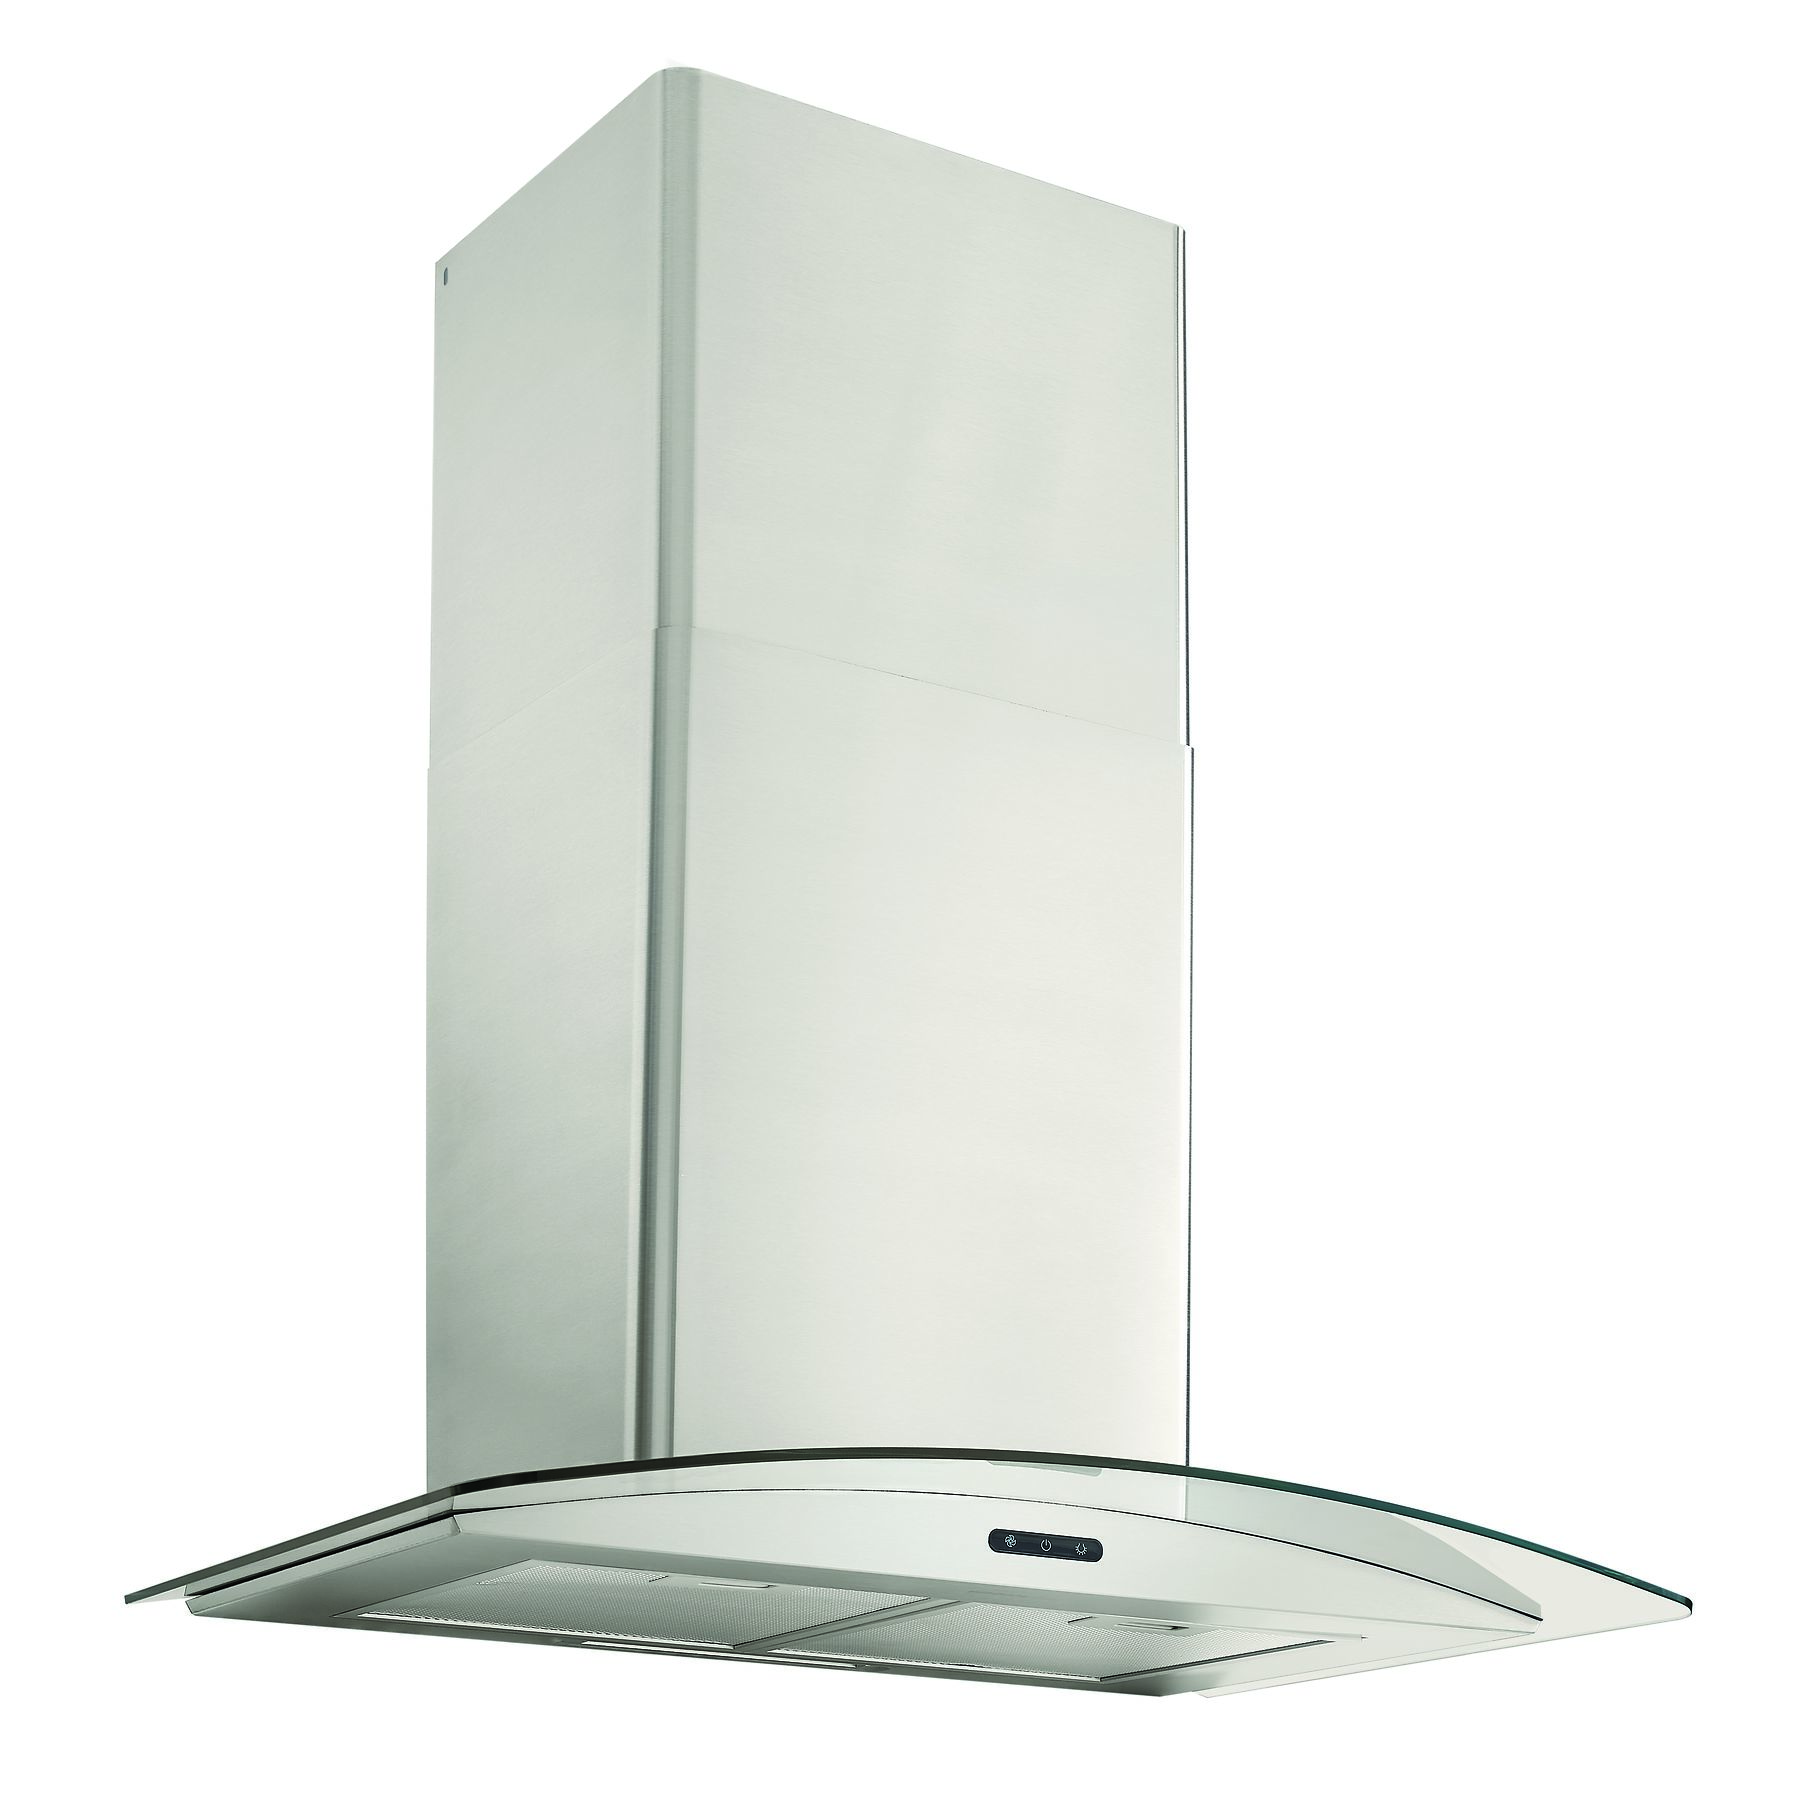 Broan® 30-Inch Convertible Curved Glass Wall-Mount Chimney Range Hood, 400 CFM, Stainless Steel